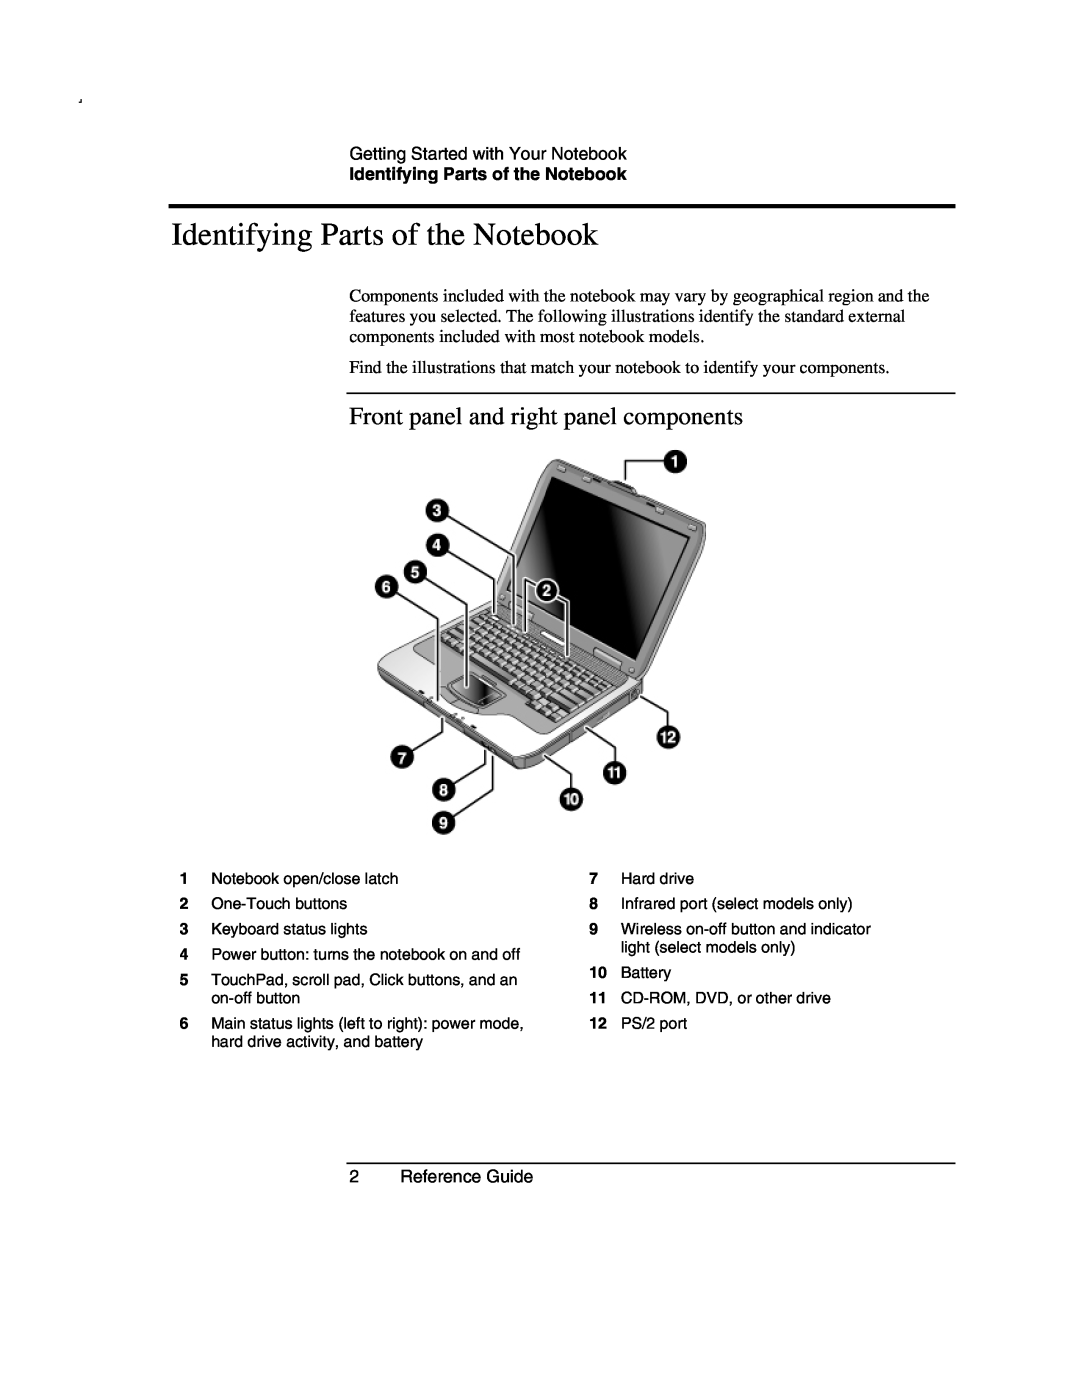 Compaq AMC20493-KT5 manual Identifying Parts of the Notebook, Front panel and right panel components 